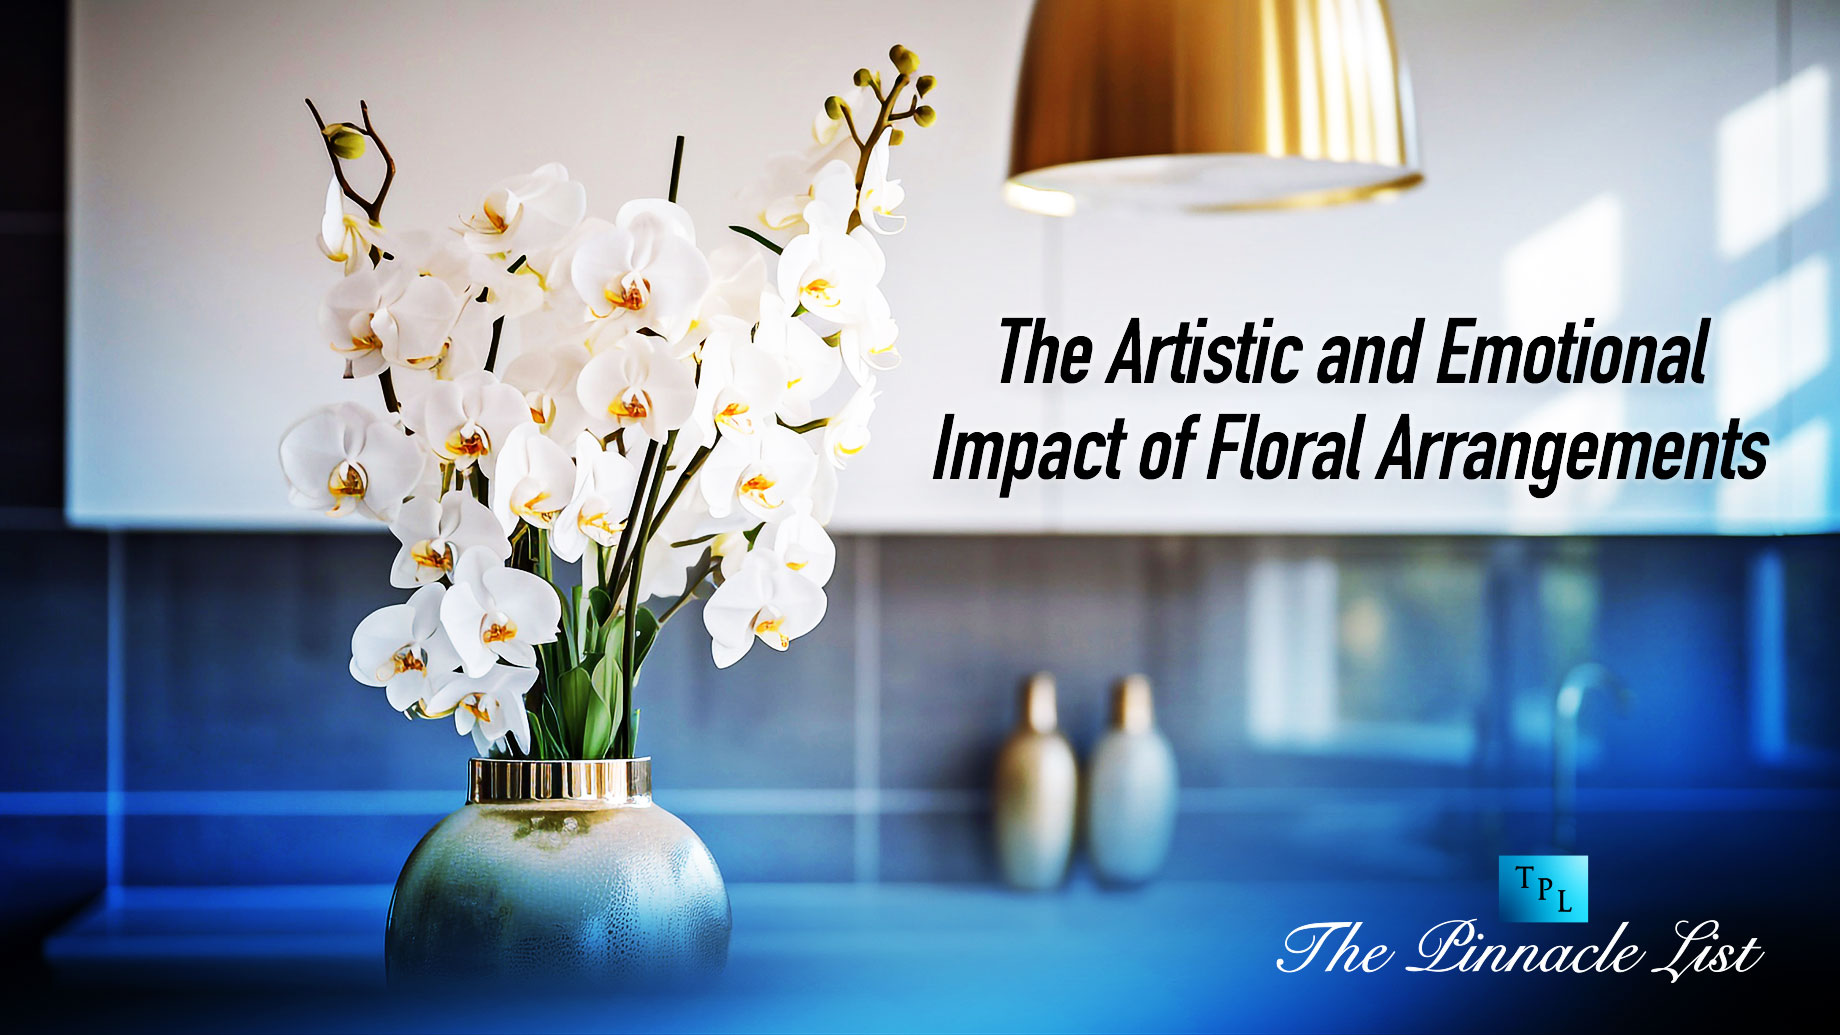 The Artistic and Emotional Impact of Floral Arrangements